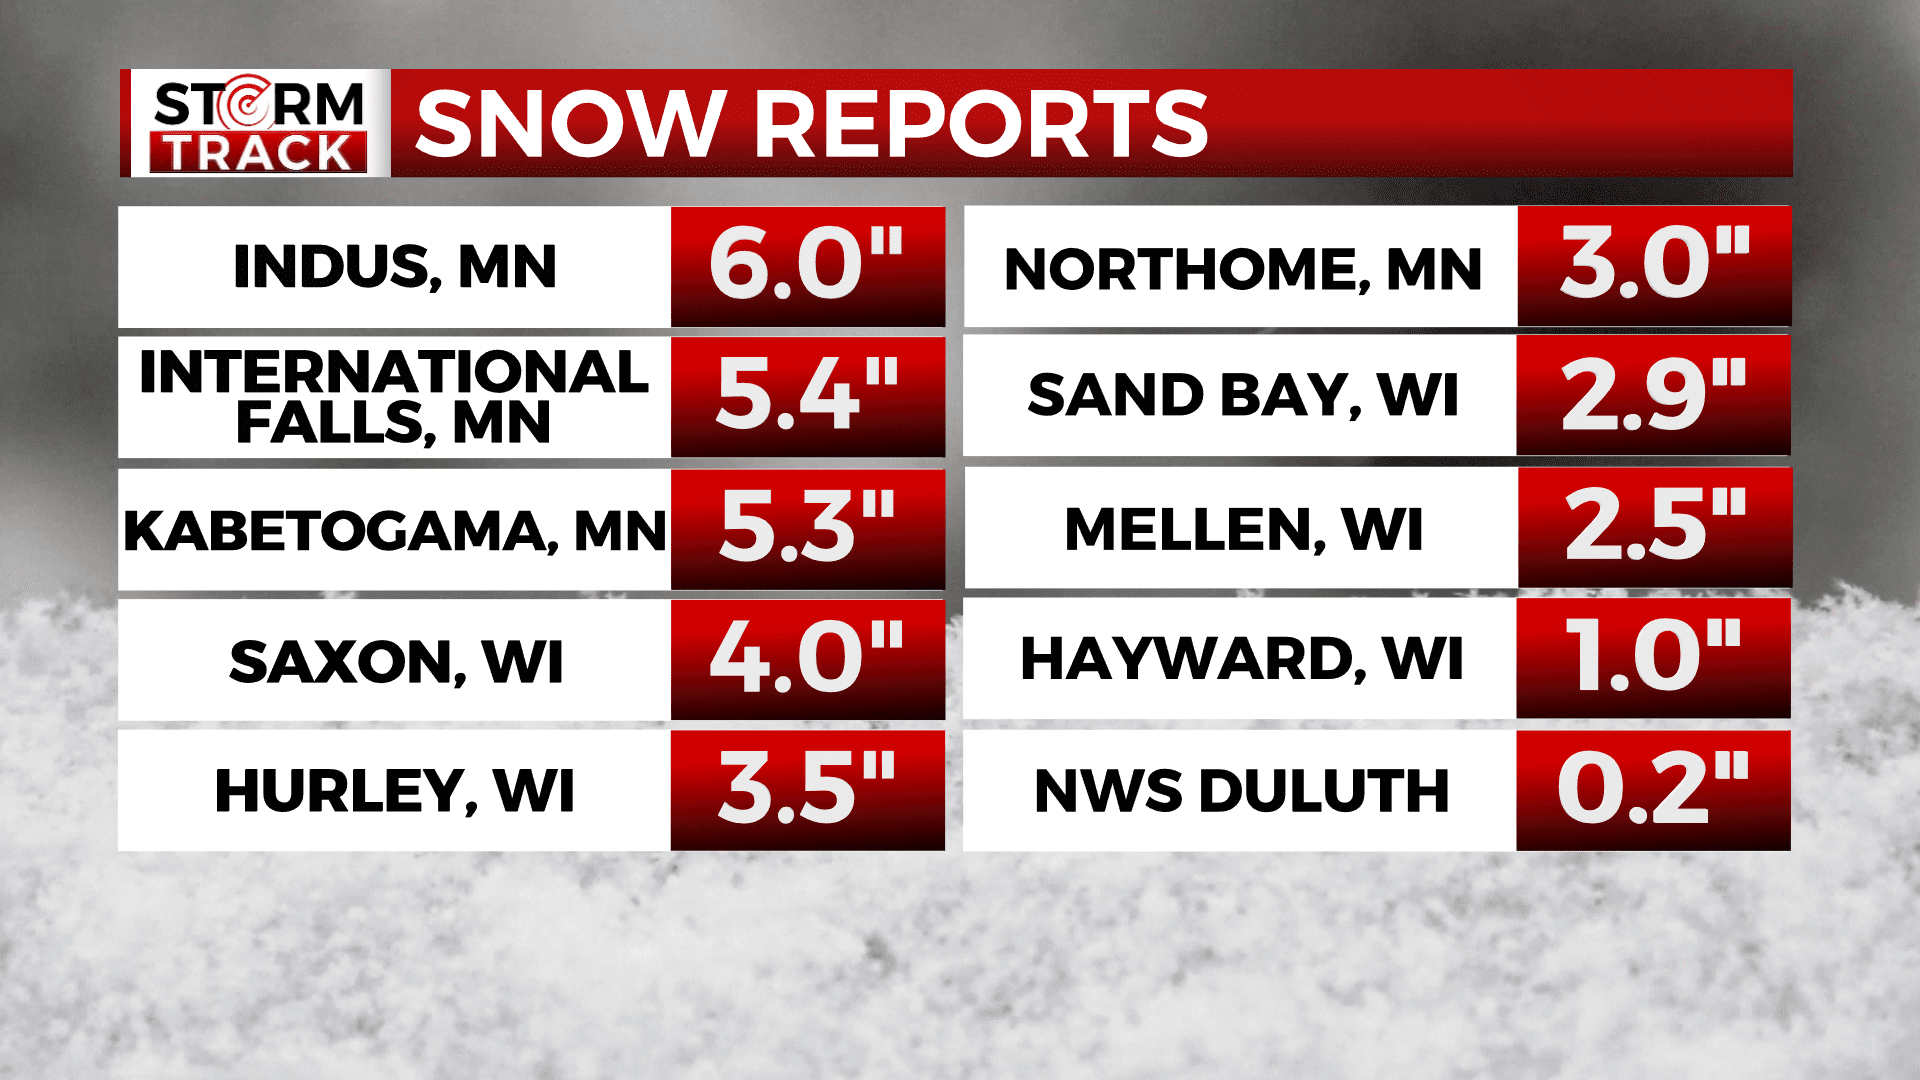 Graphic showing snow reports